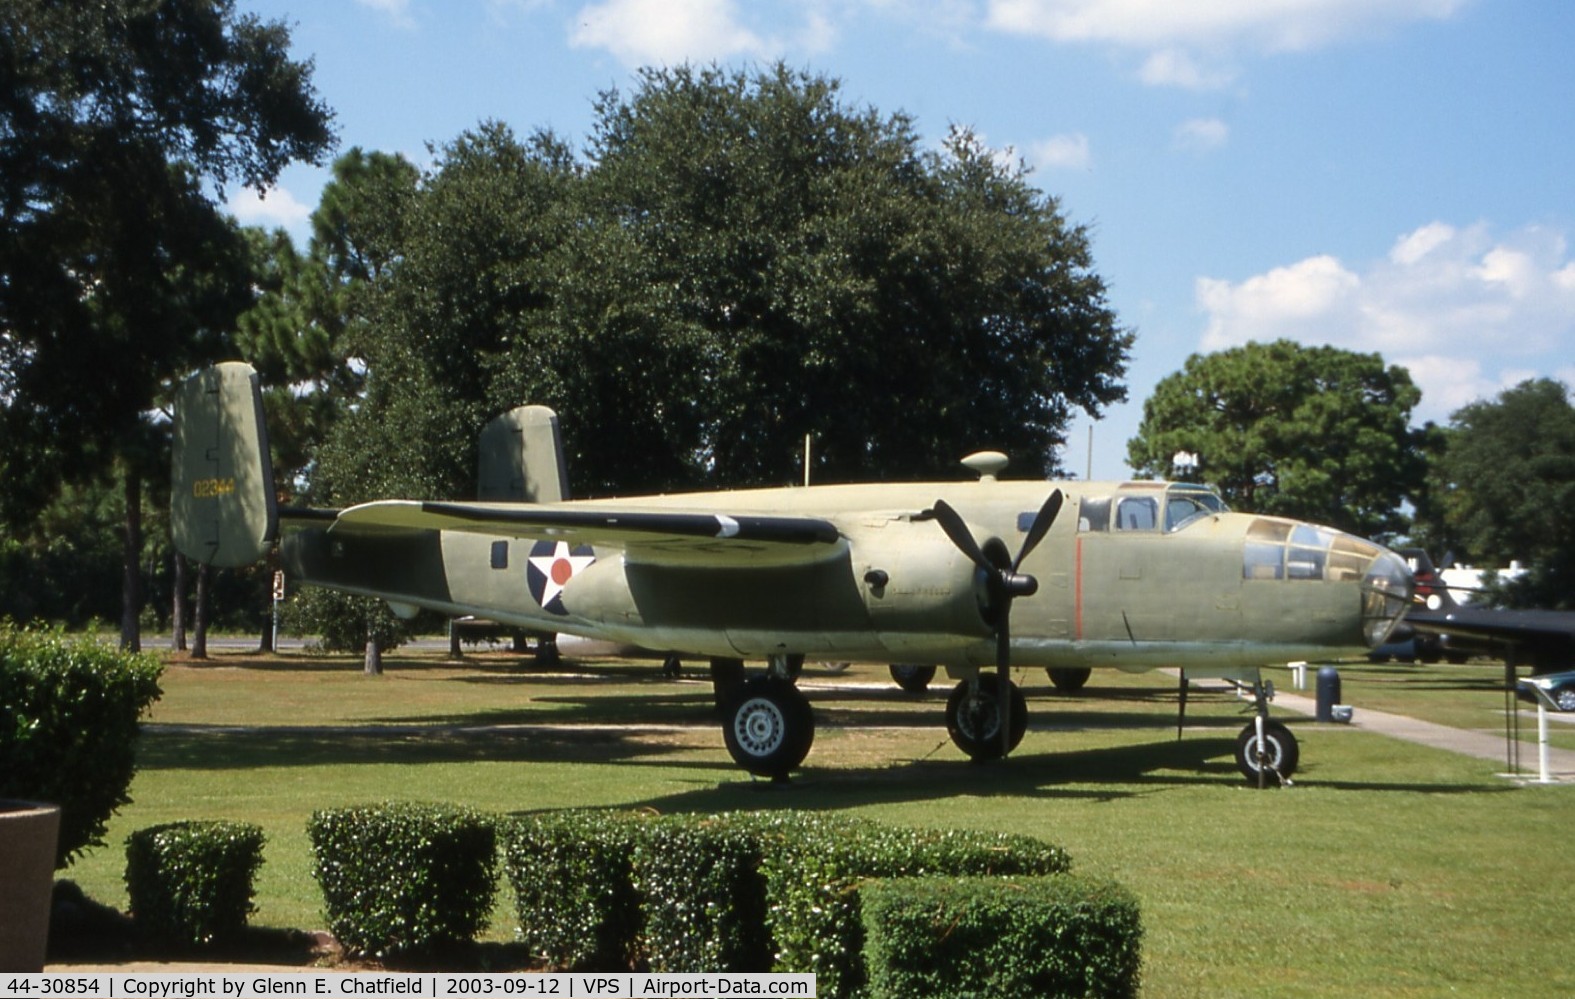 44-30854, 1944 North American TB-25N-25/27-NC Mitchell C/N 108-34129, Air Force Armament Museum. Was last B-25 on inventory, retired in 1959